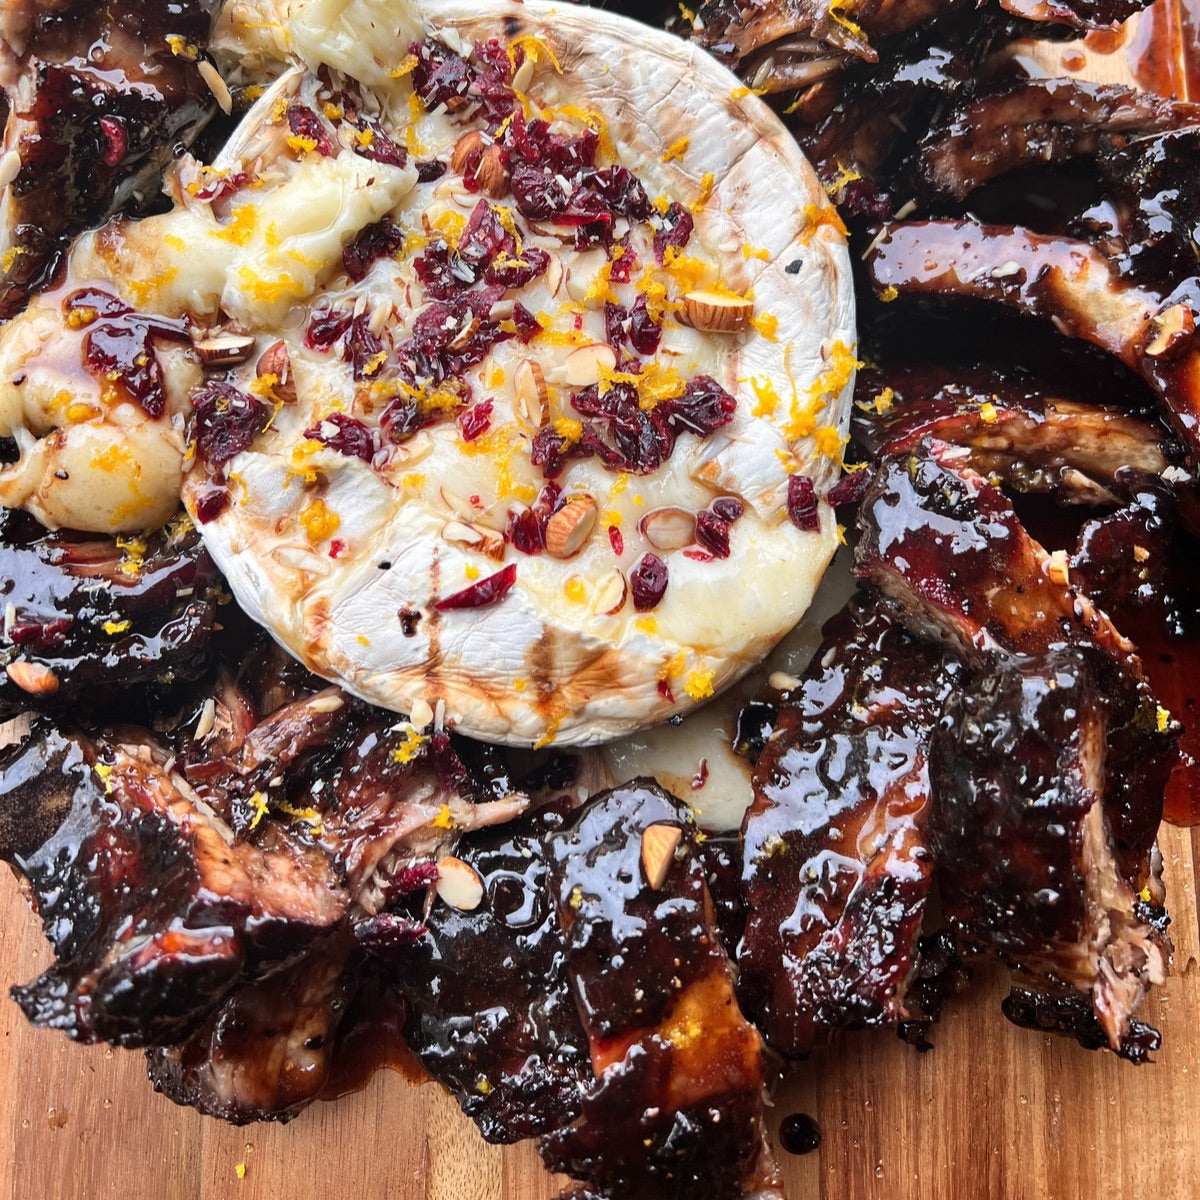 smoked baby back ribs with black currant bbq sauce and smoked brie